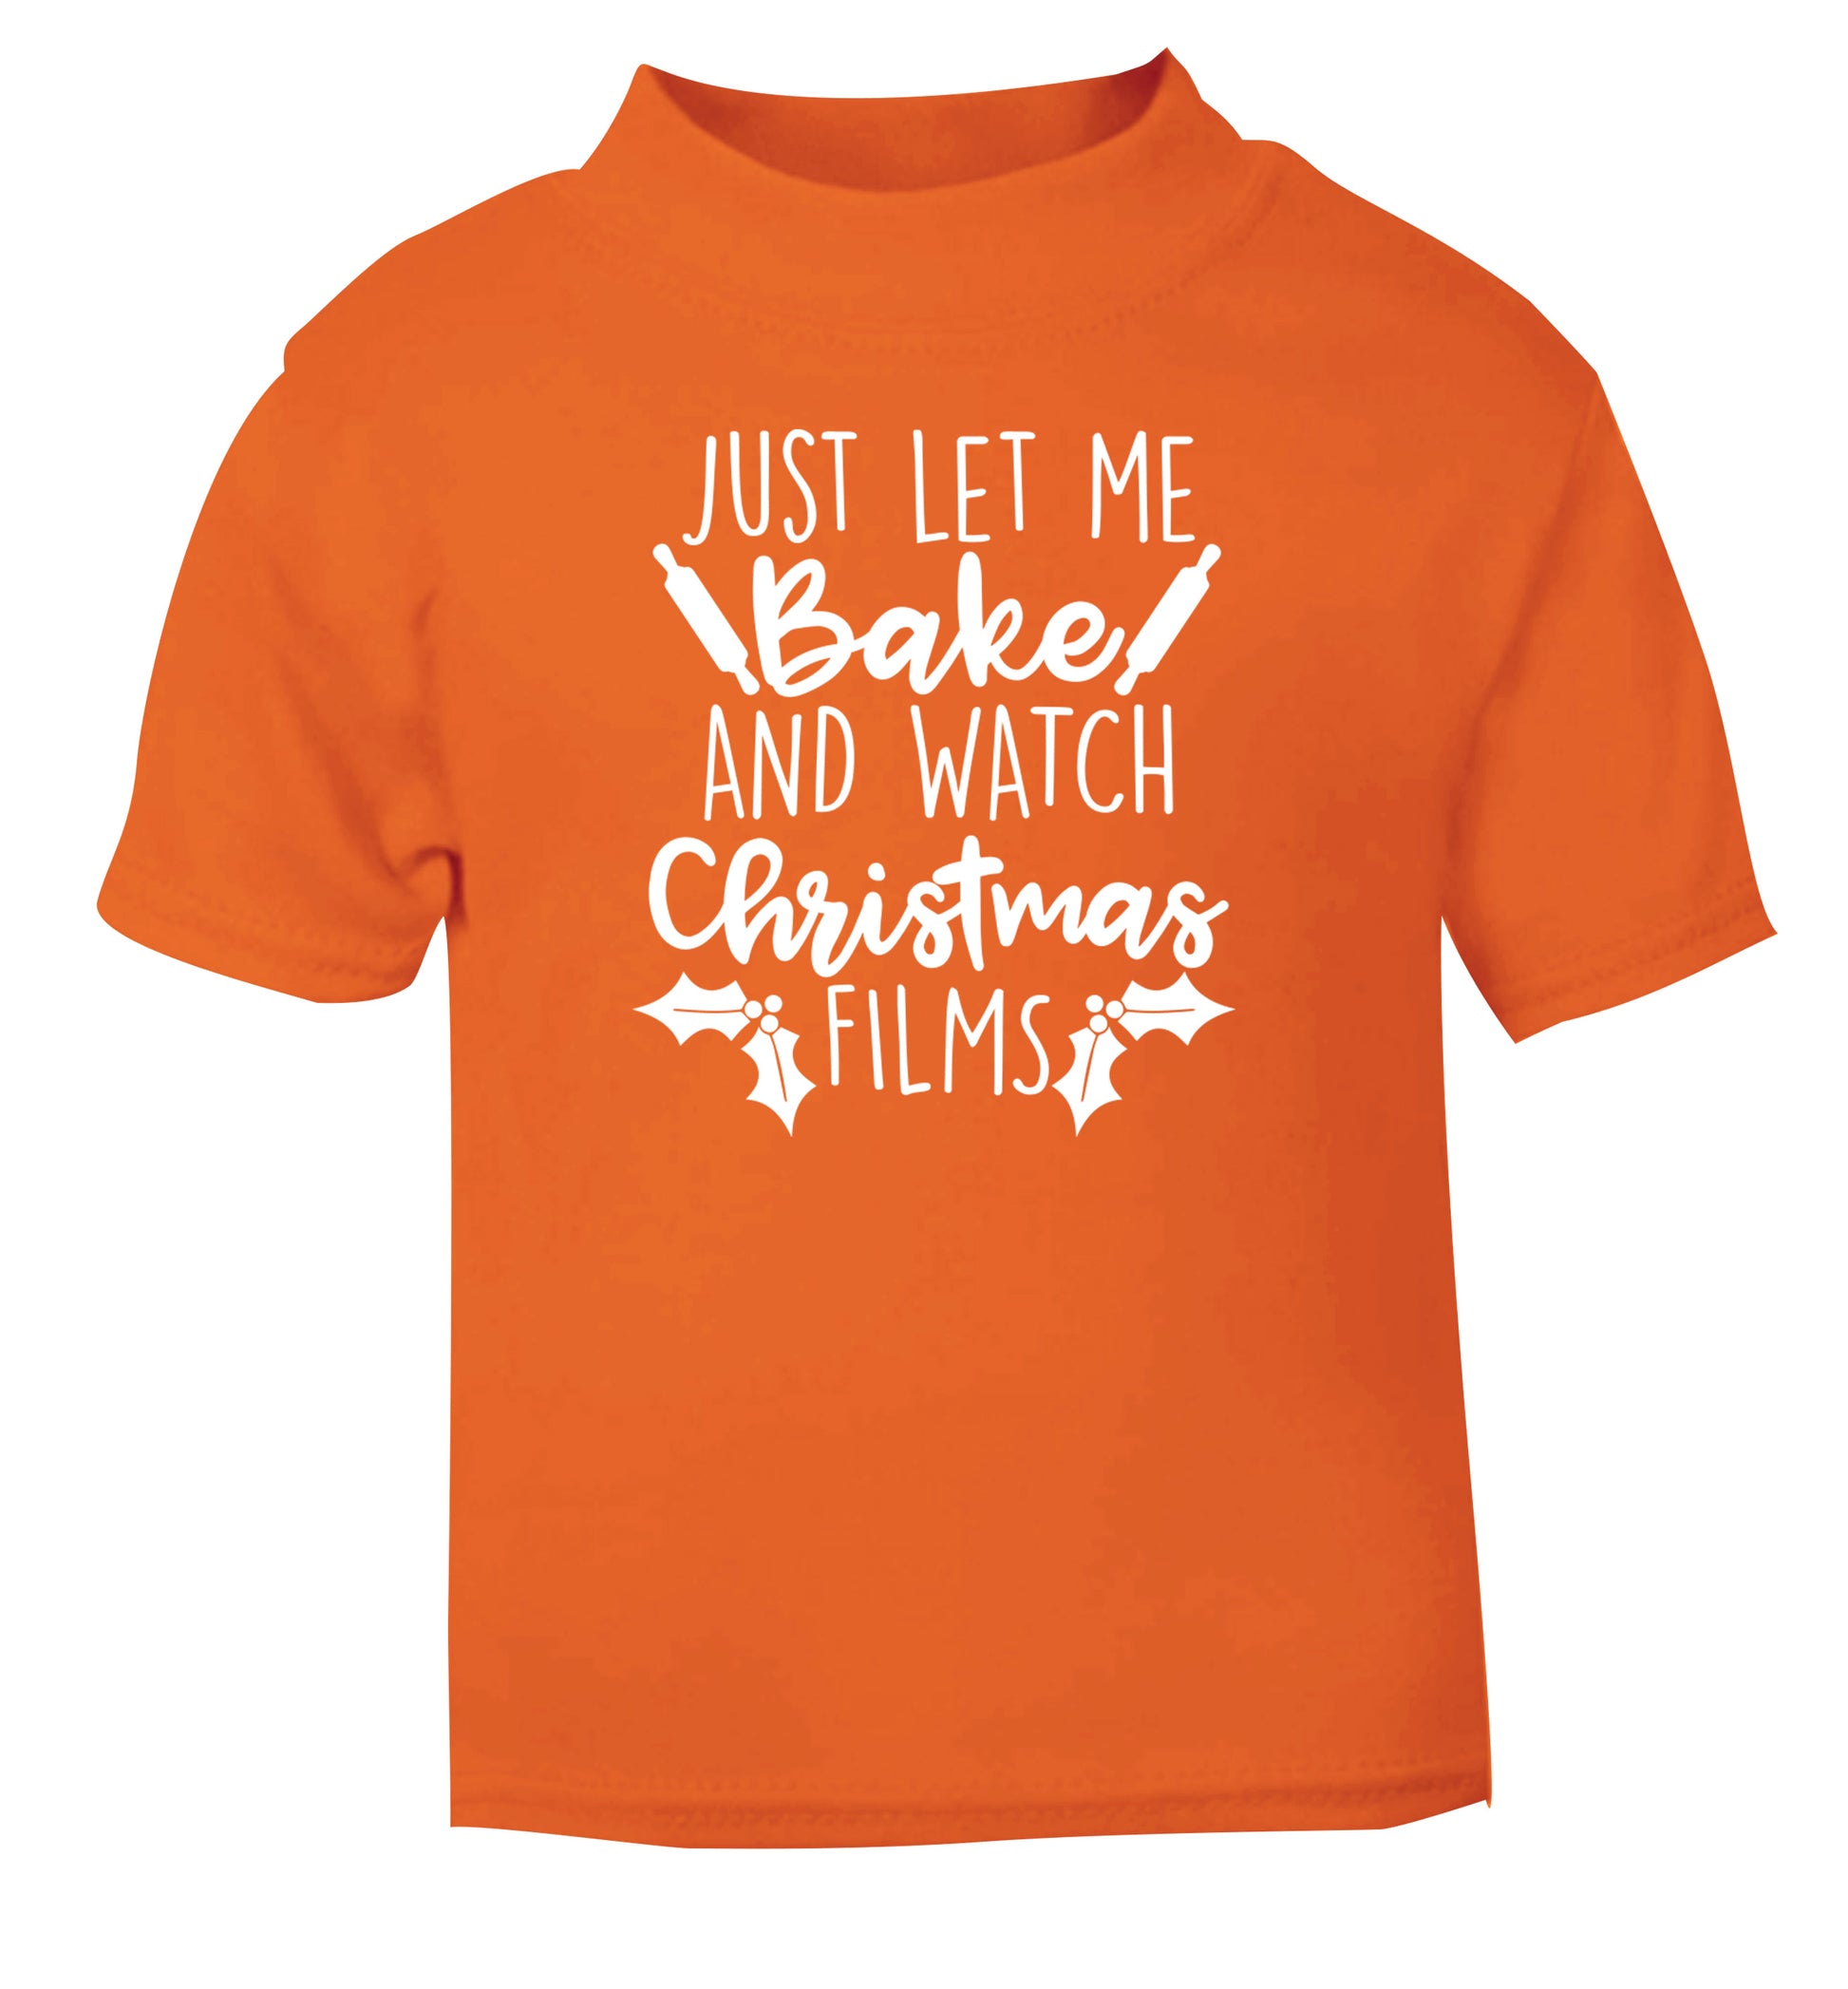 Just let me bake and watch Christmas films orange Baby Toddler Tshirt 2 Years